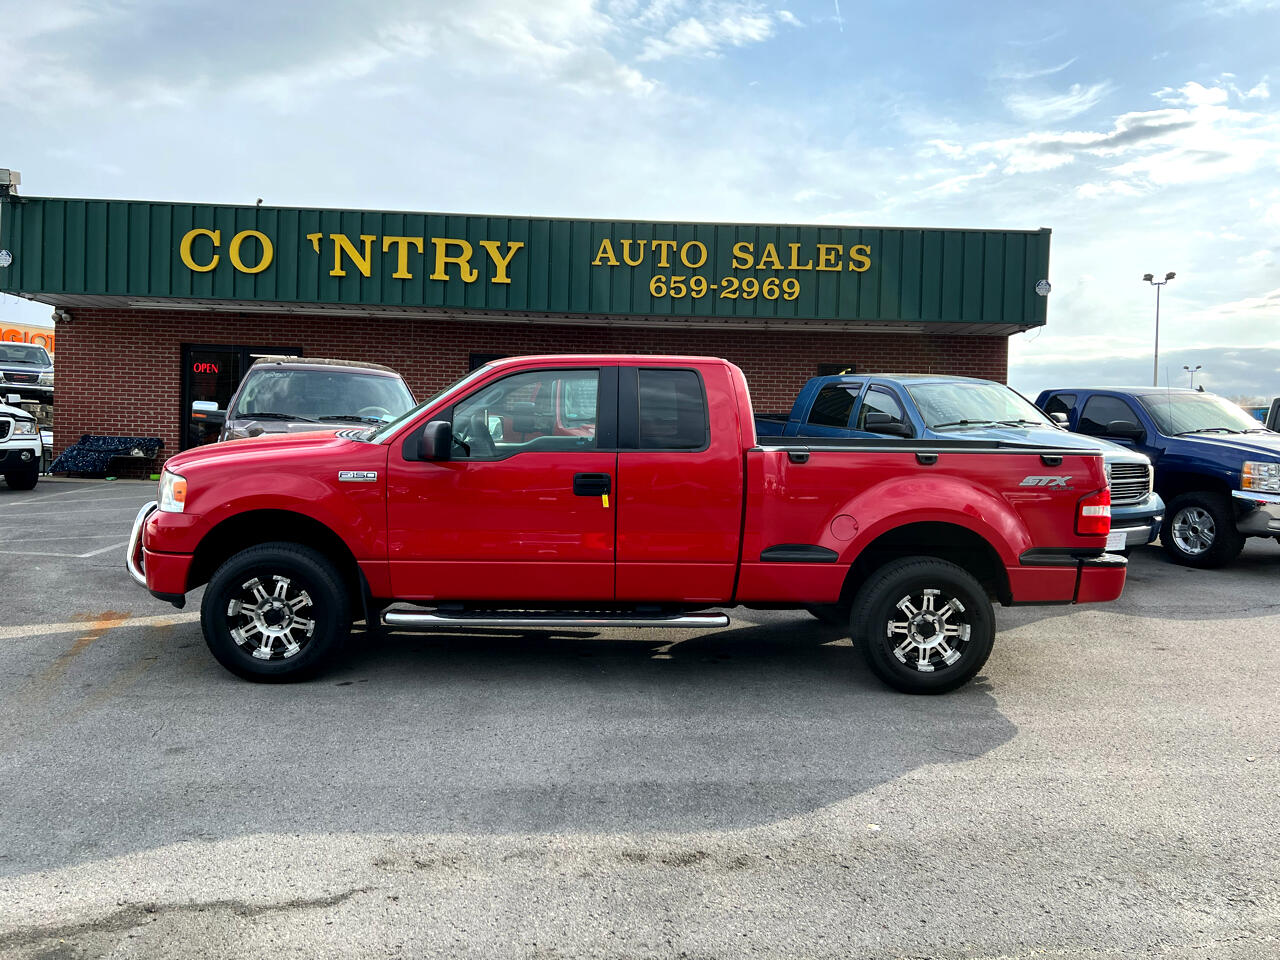 Used 2008 Ford F-150 STX SuperCab Flareside 4WD for Sale in Glasgow KY  42141 Country Auto Sales